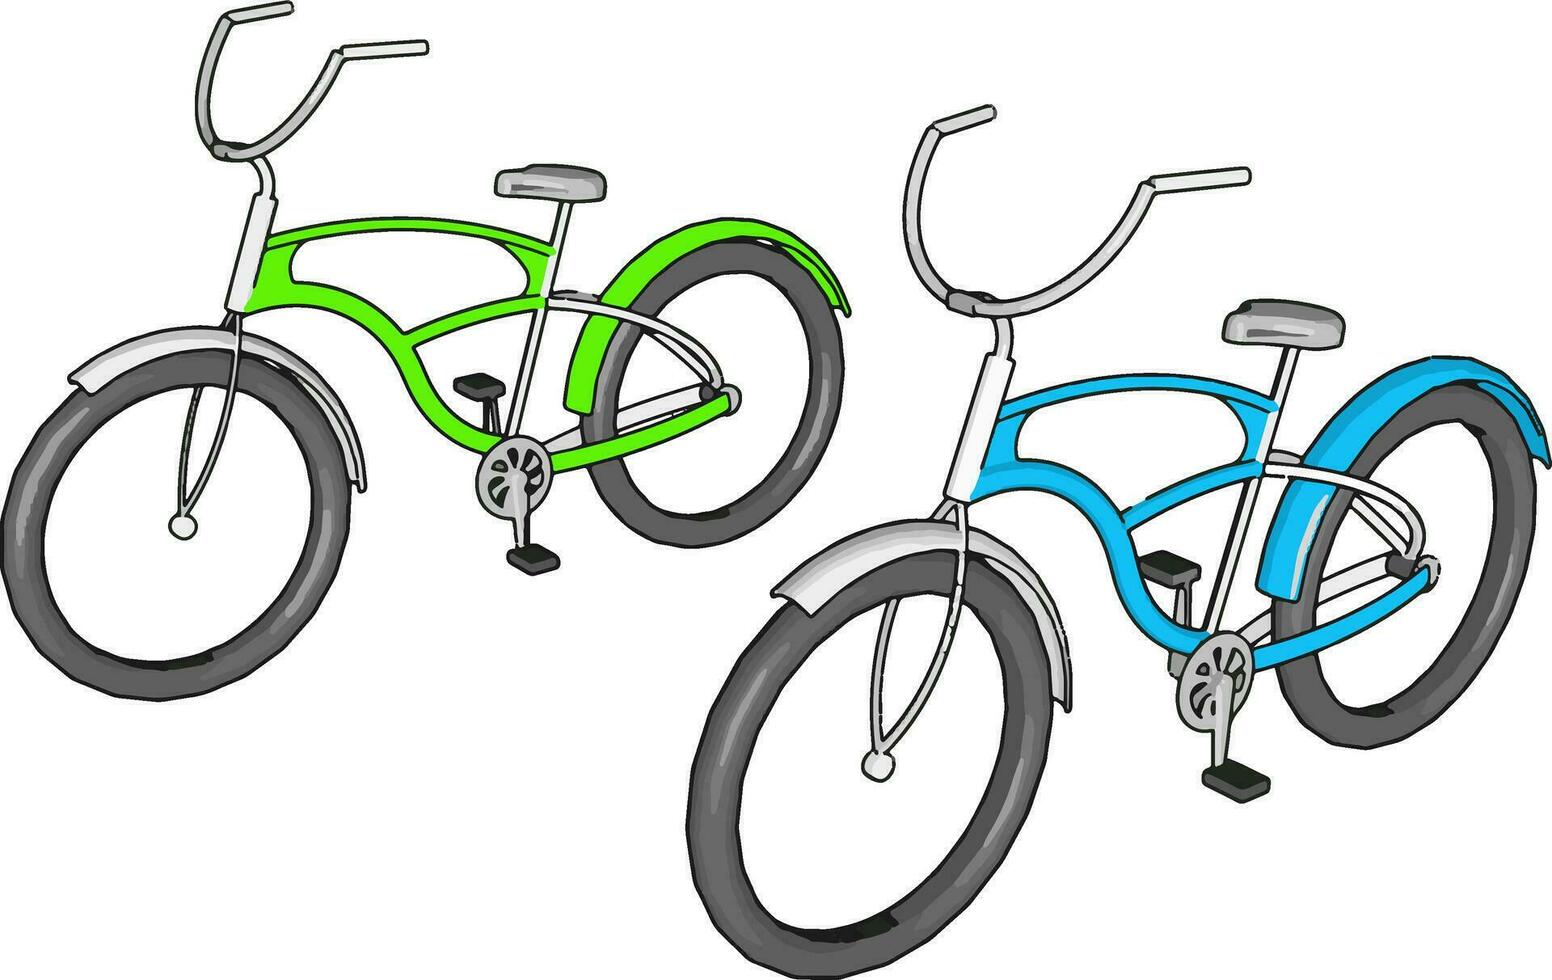 Green and blue bike, illustration, vector on white background.